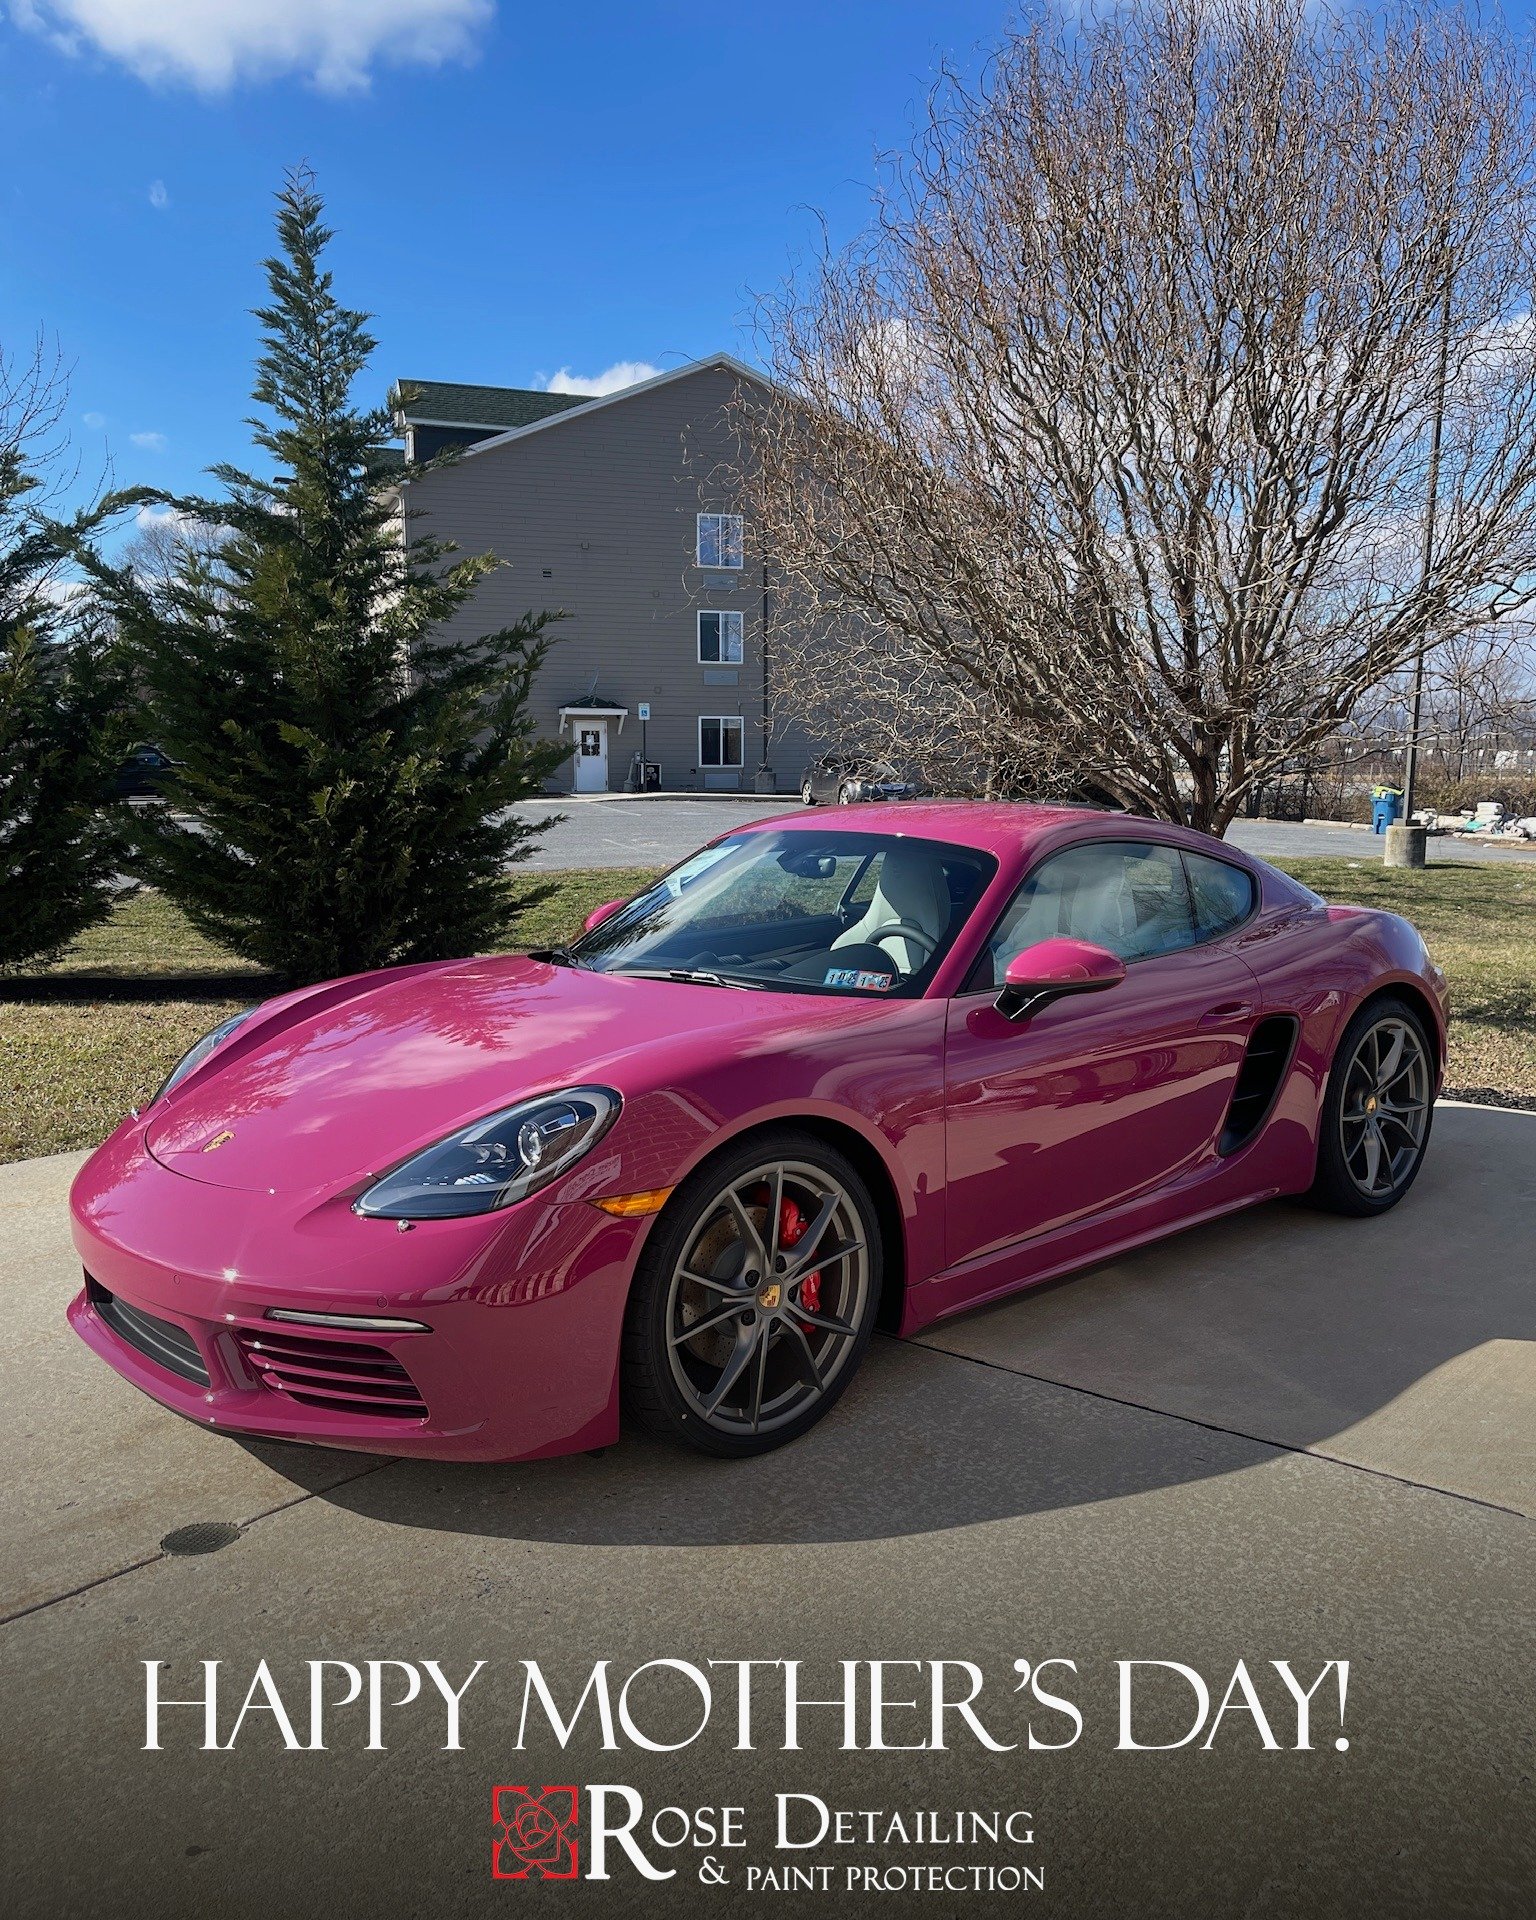 Happy Mother&rsquo;s Day from Rose Detailing 🌹💗

#rosedetailing #mom #mothersday #rubystar #porsche